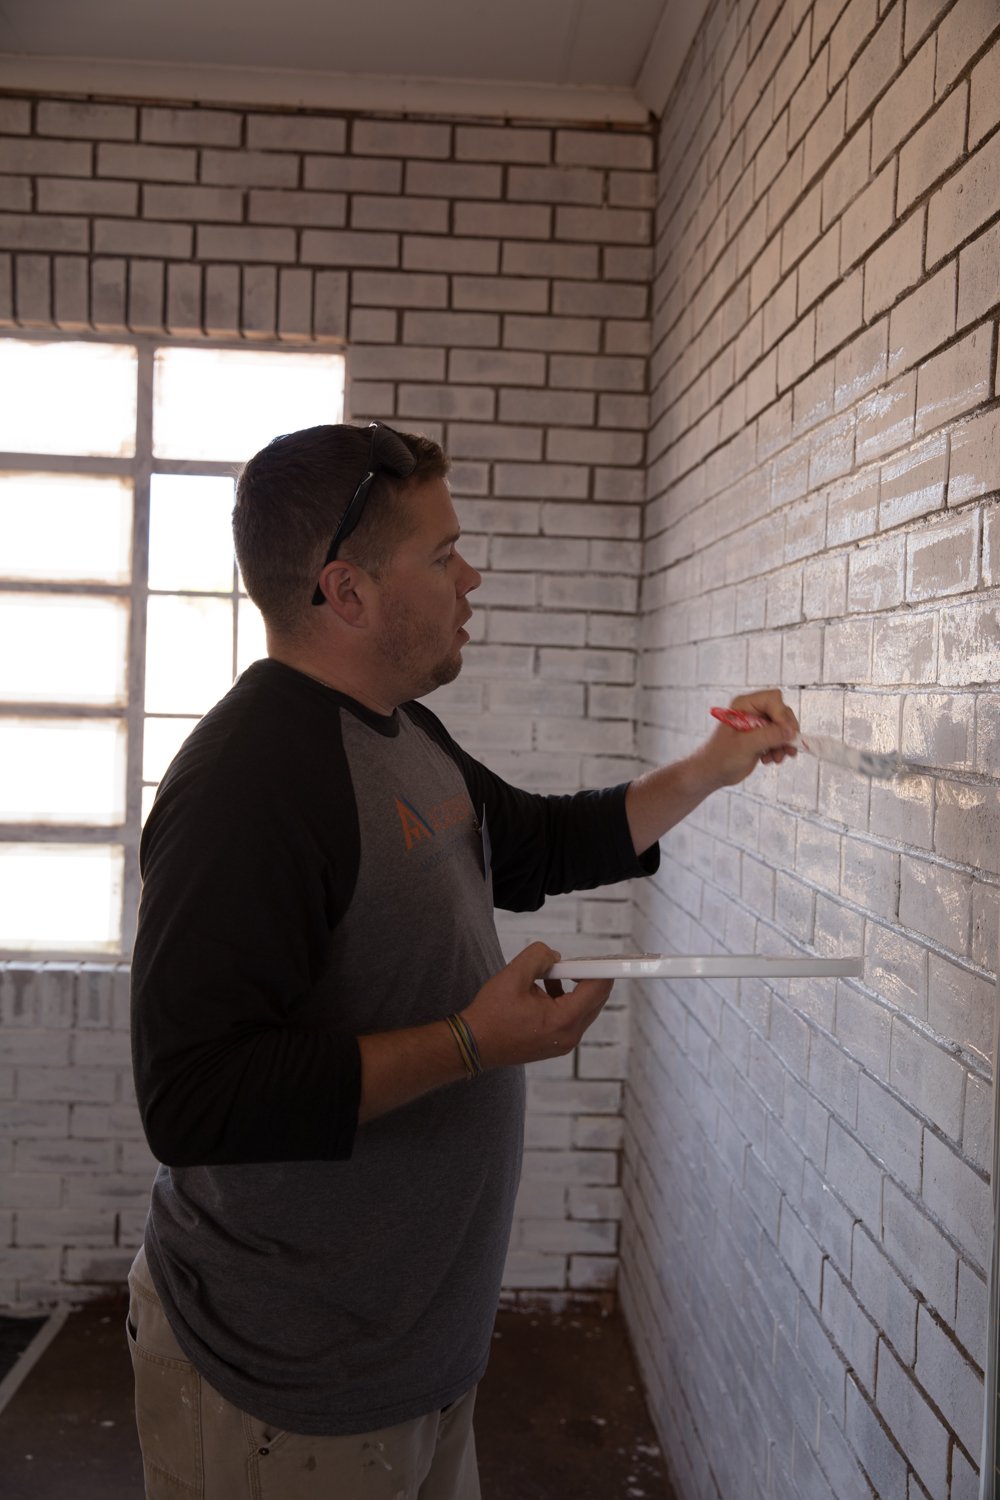 Nick Staker paints a classroom at The Makwetse School